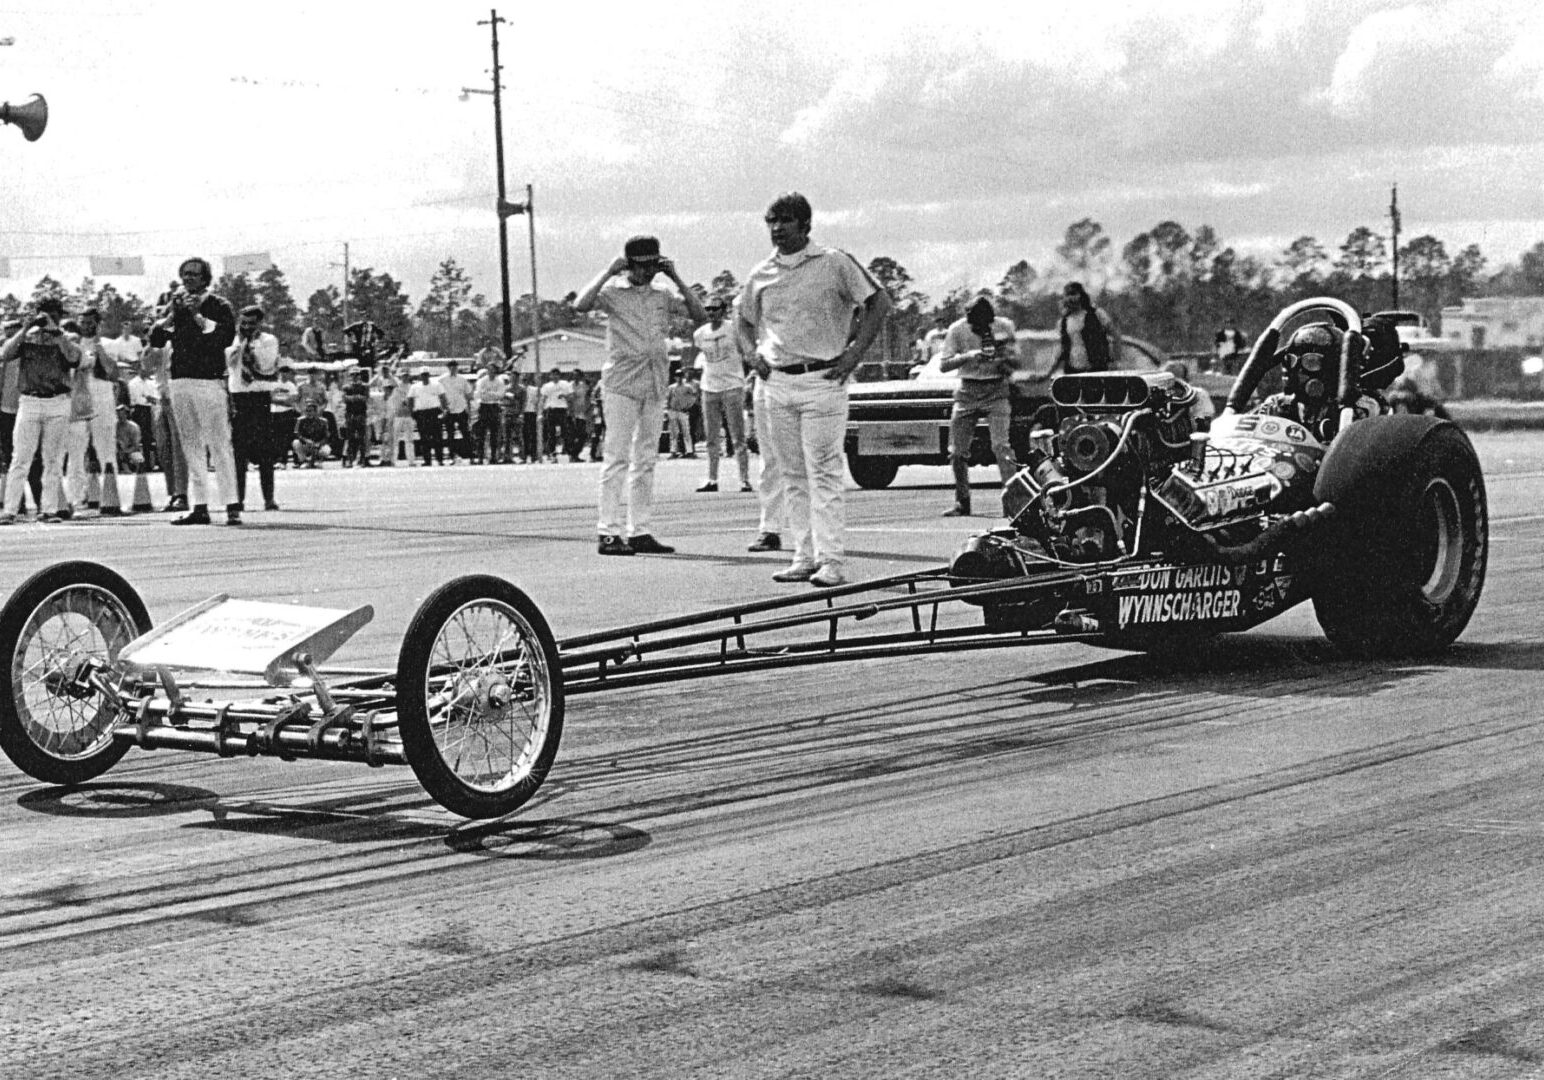 Built in early 1969 at Seffner by Garlits Chassis Shop.  This was the first dragster to successfully employ a planetary two – speed transmission reaching a top speed of 240 MPH and 6.51 second ET. Unfortunately, this success, nearly cost Don his life. In a freak transmission explosion at Long Beach, California on March 8,1970 Don lost part of his right foot and inured a spectator. It was this accident that led to the development of the rear engine car. 